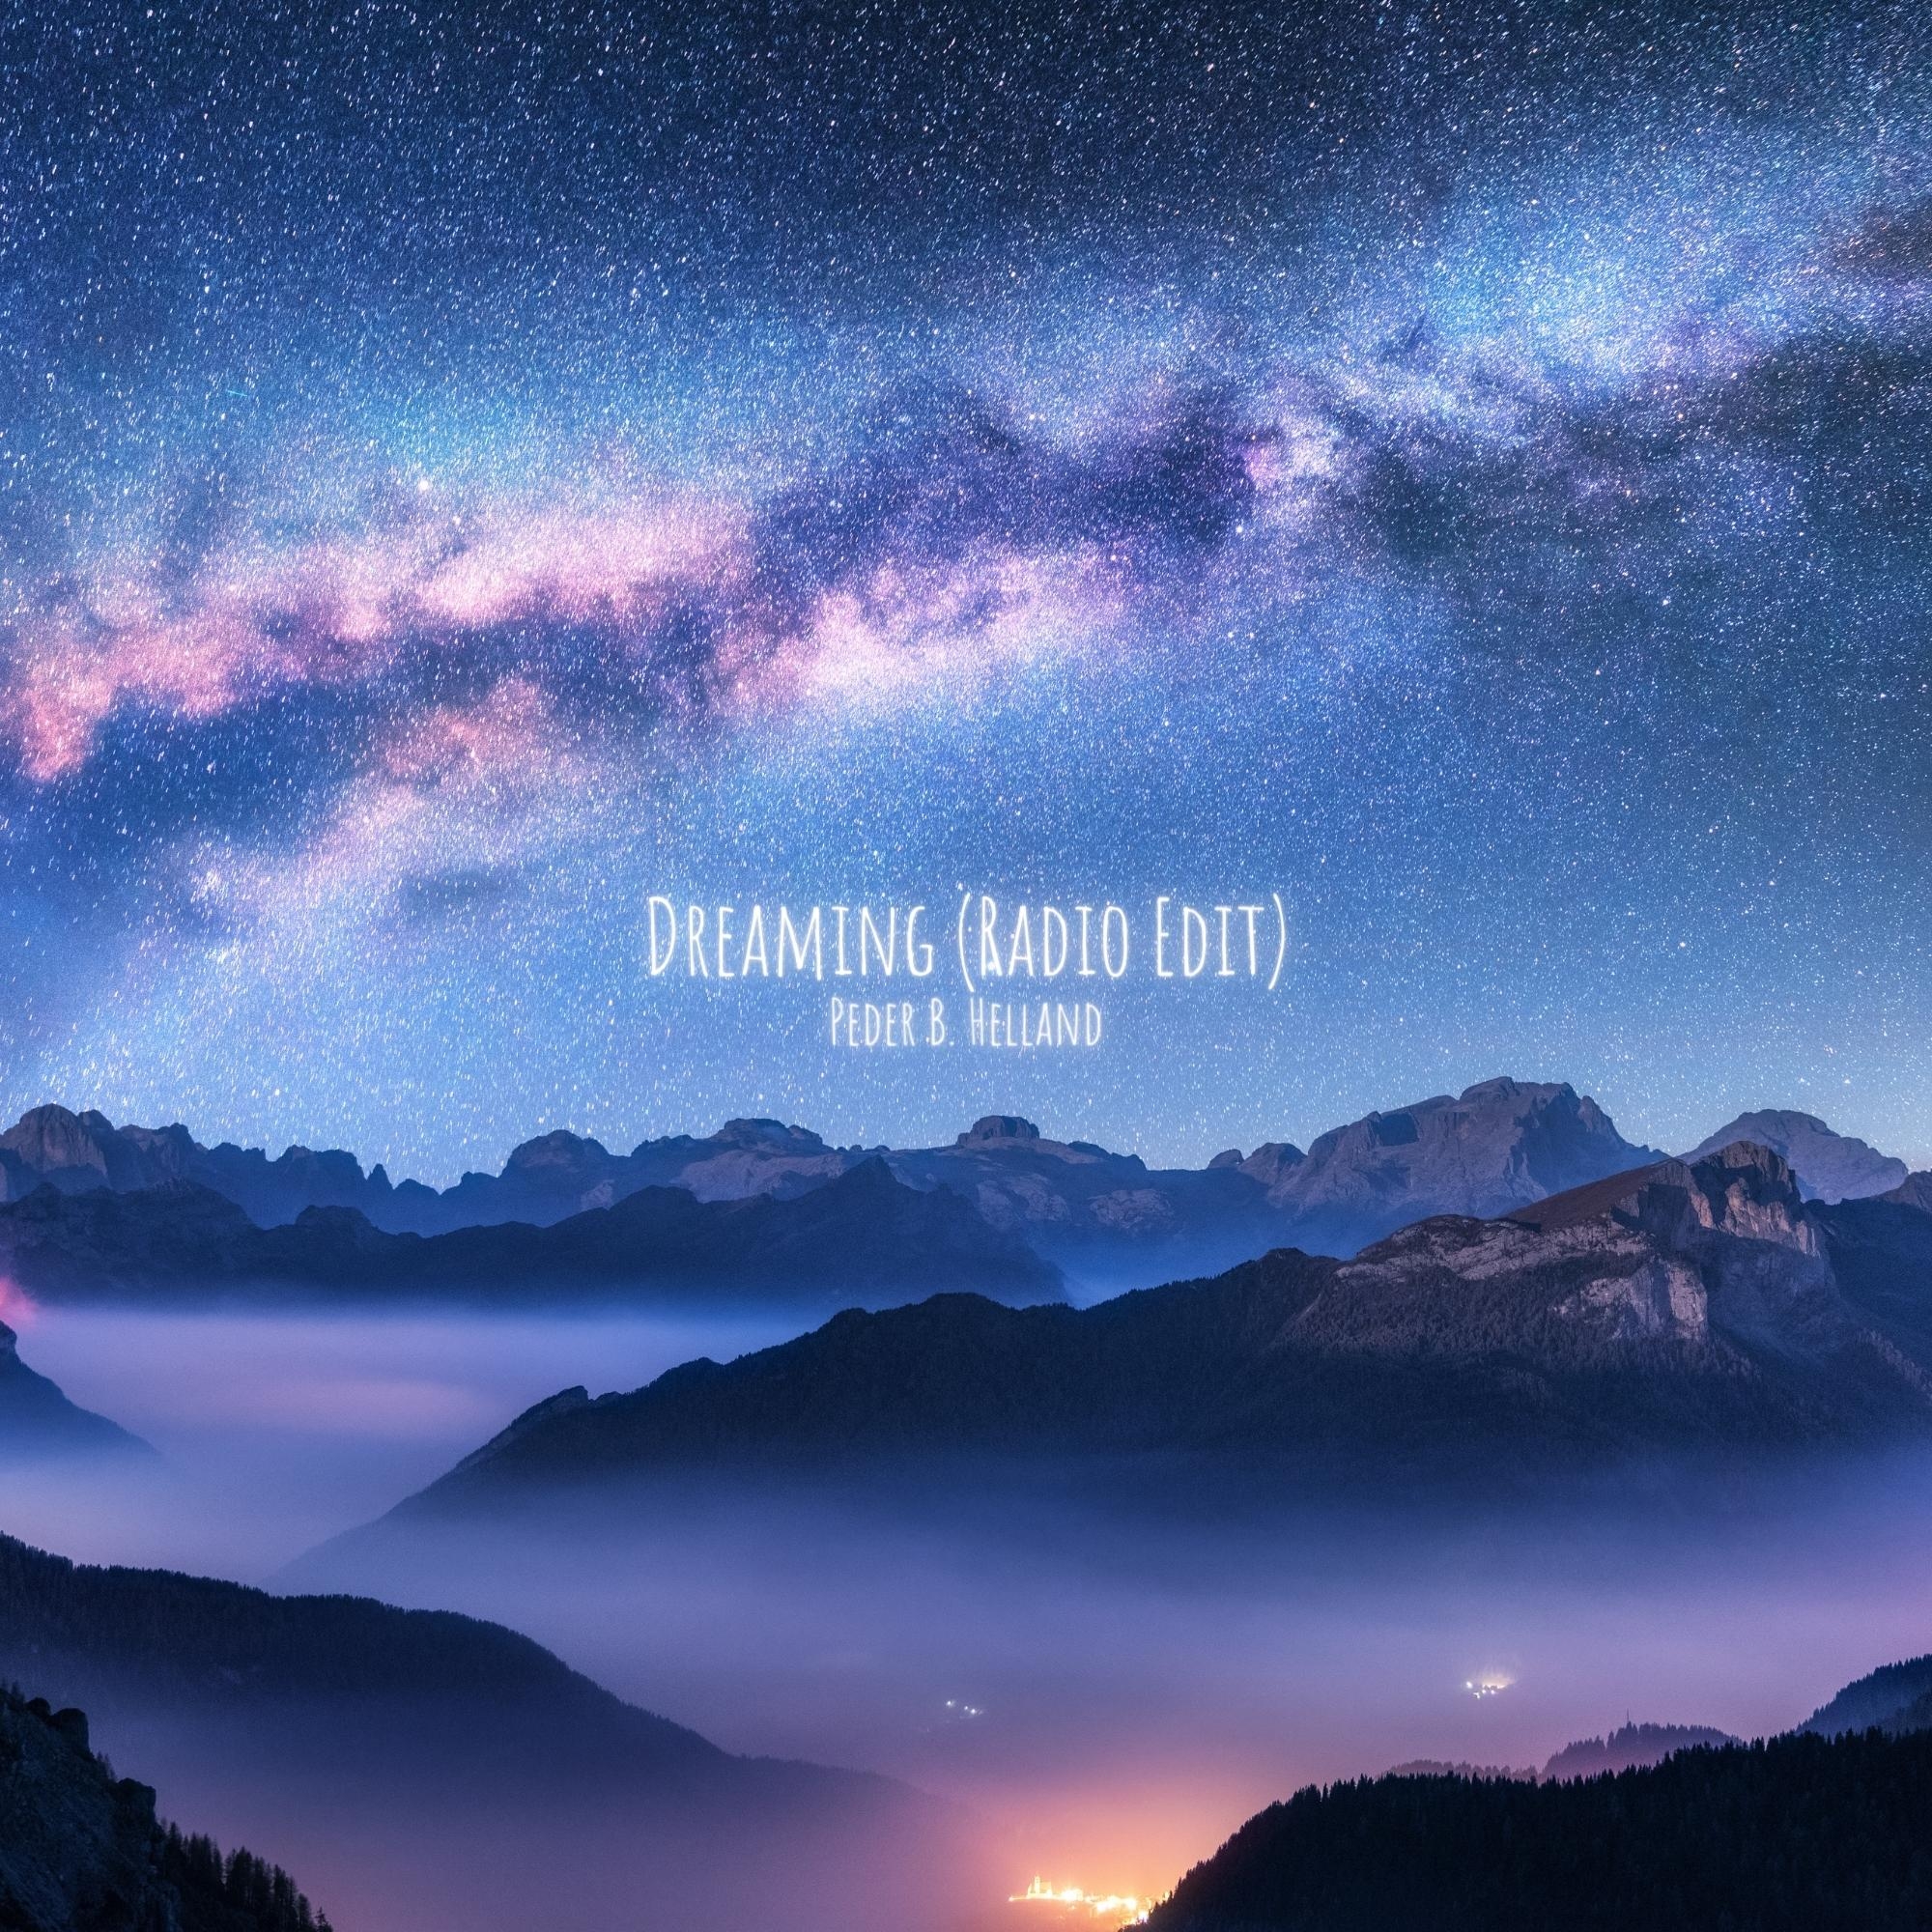 Cover art for the single Dreaming (Radio Edit) by Peder B. Helland